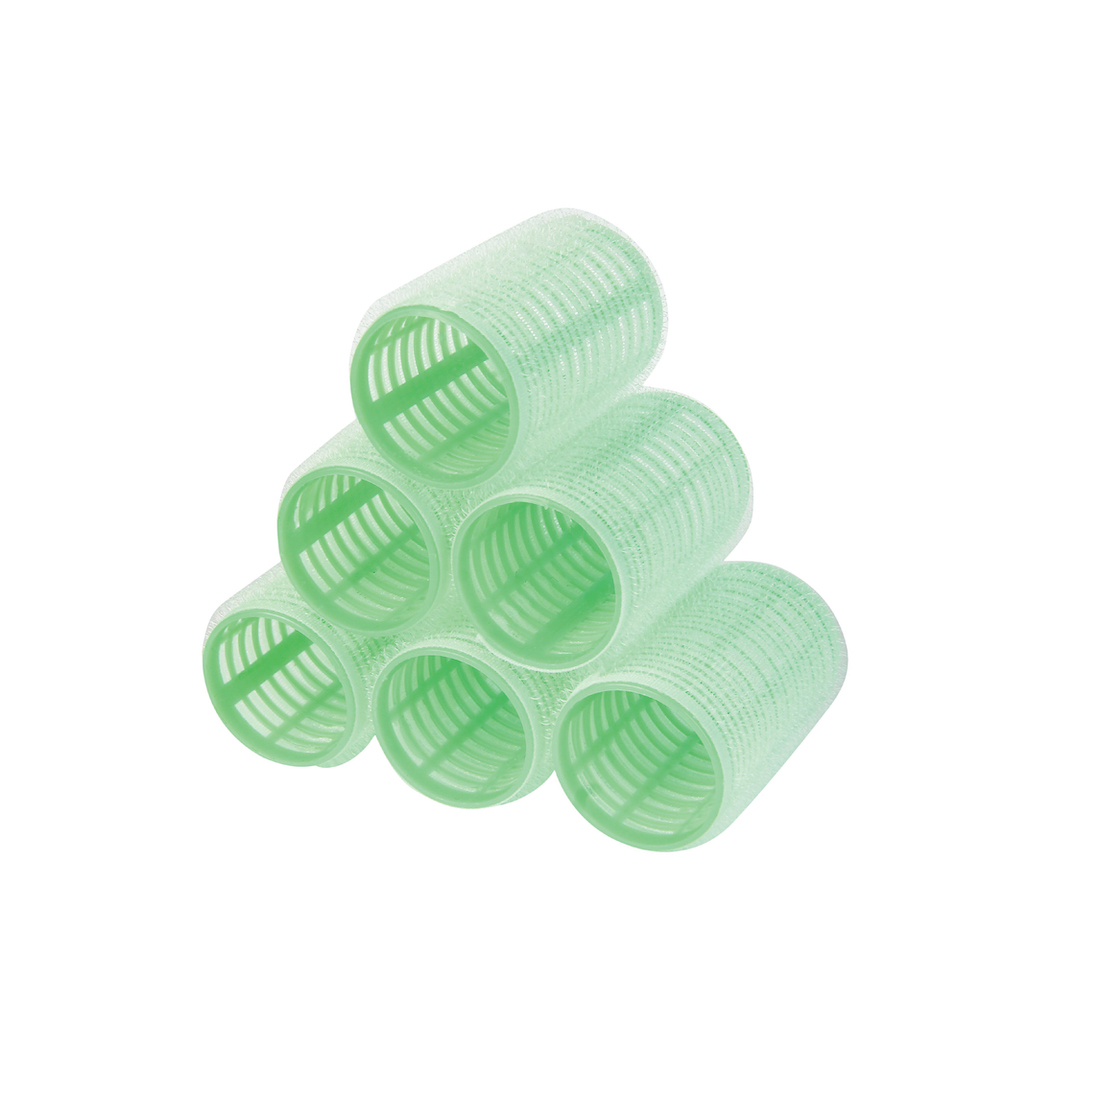 Hair Rollers Large, 6 Pcs